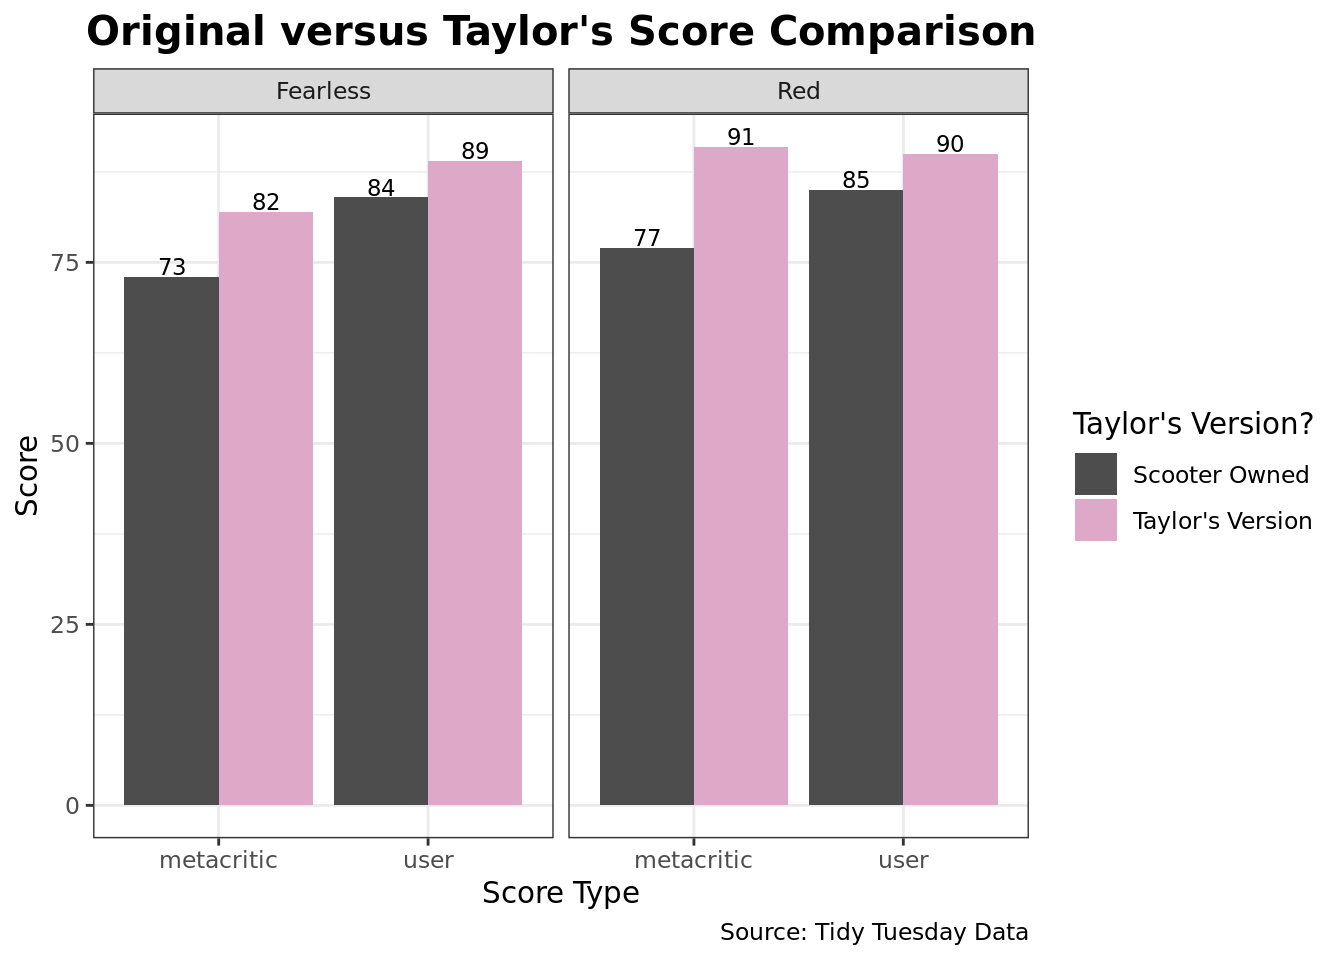 This figure is a bar plot titled "Original versus Taylor's Score Comparison" that displays 8 total bars, each representing a different score value. On the left side of the plot, it dsiplays the user and metacritic score for both the original version of Fearless and the "Taylor's Version" of Fearless. On the right, the same but this time for the two versions of the album Red. On top of each bar is the score for the plots. The plot shows that all of the Taylor's Version score higher than the original version for both metacritic and user scores.#the wrangle